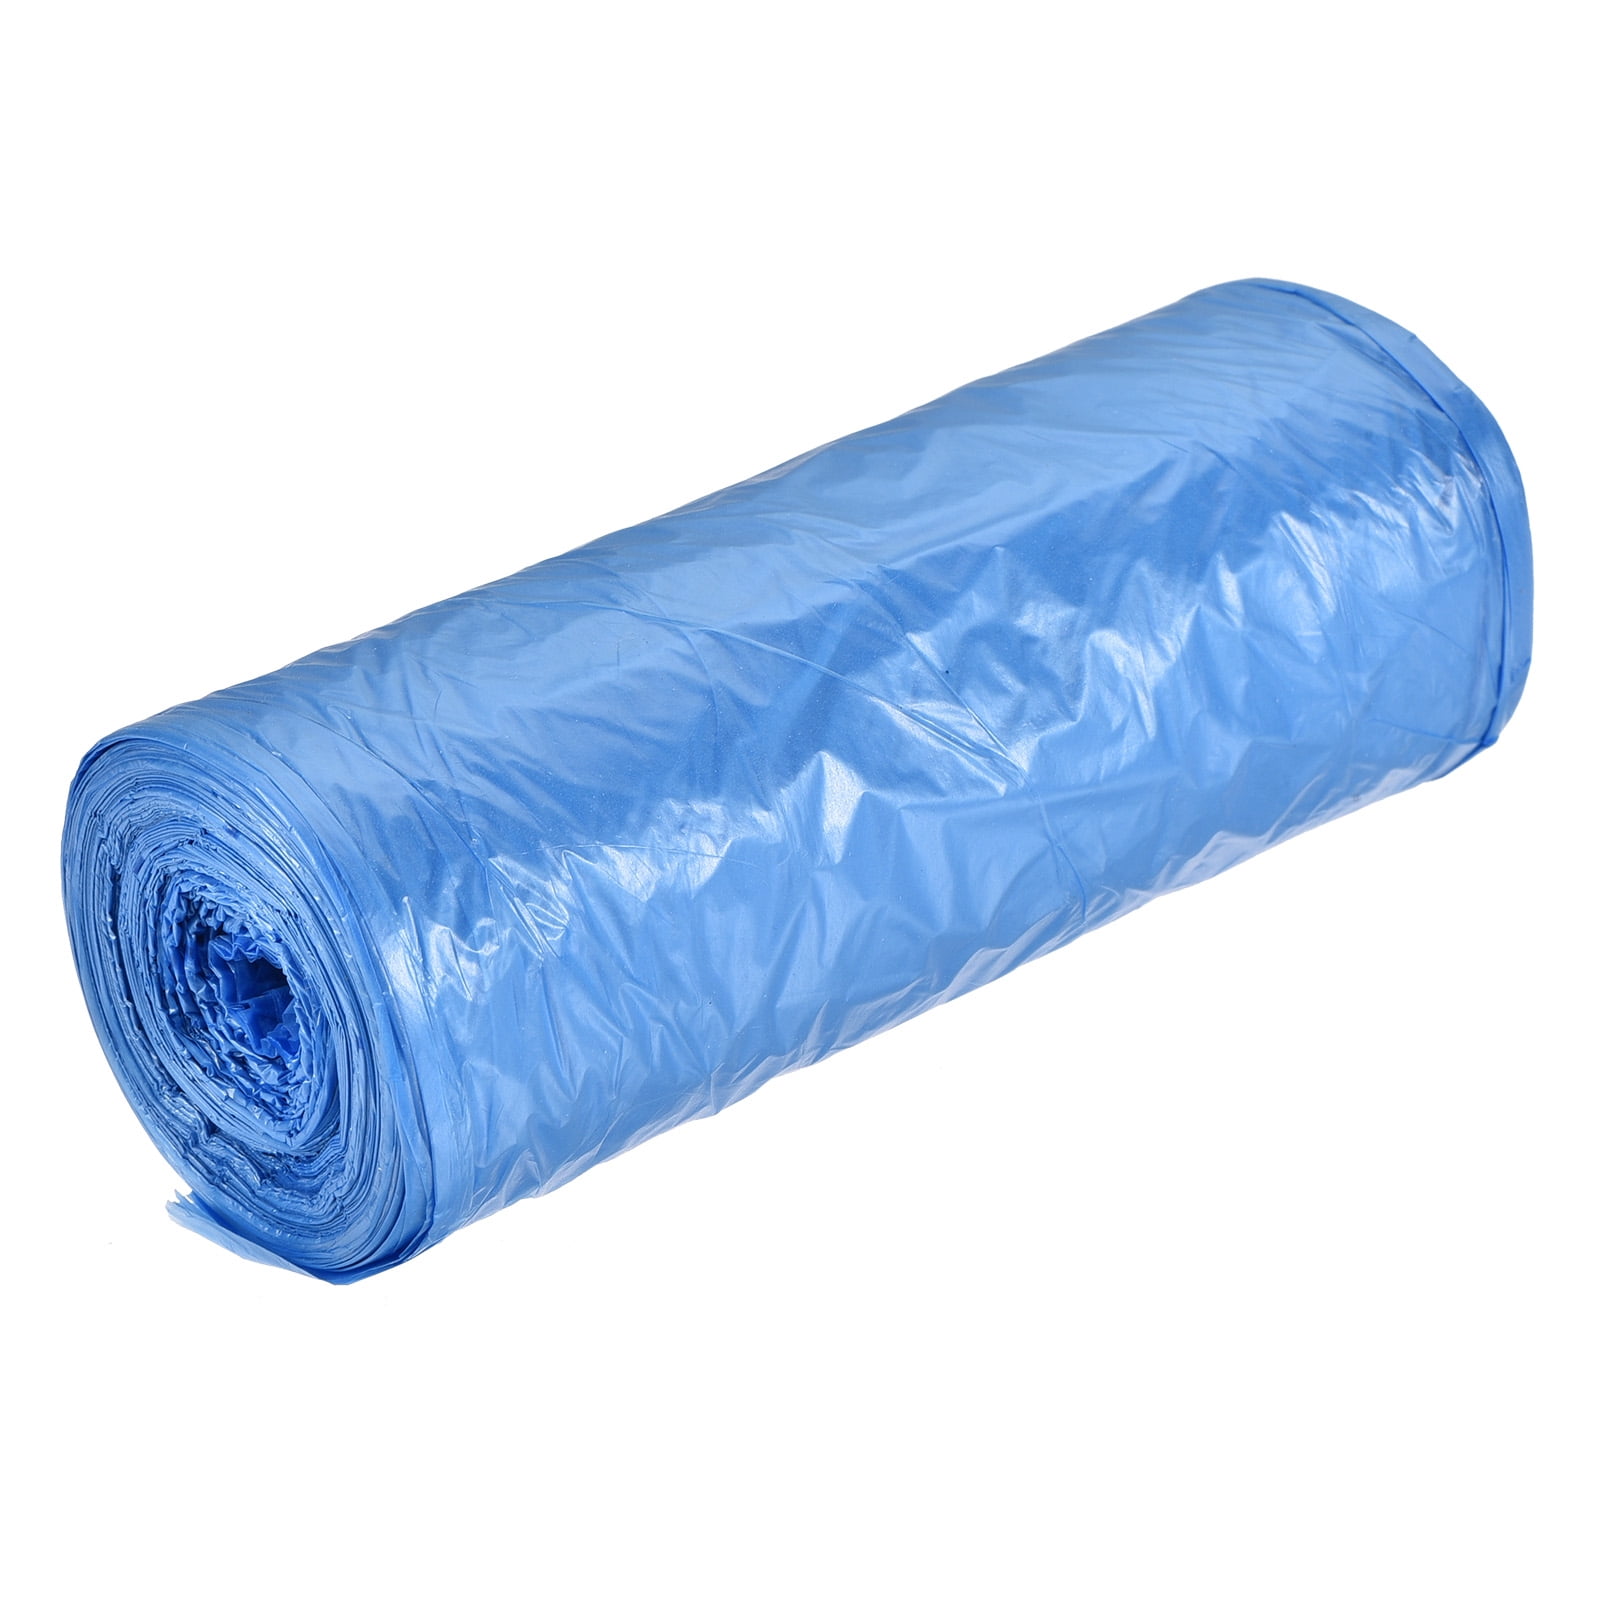 100 Counts / 5 Rolls 2-4 Gallon Small Trash Bags Waste Basket Liners Blue